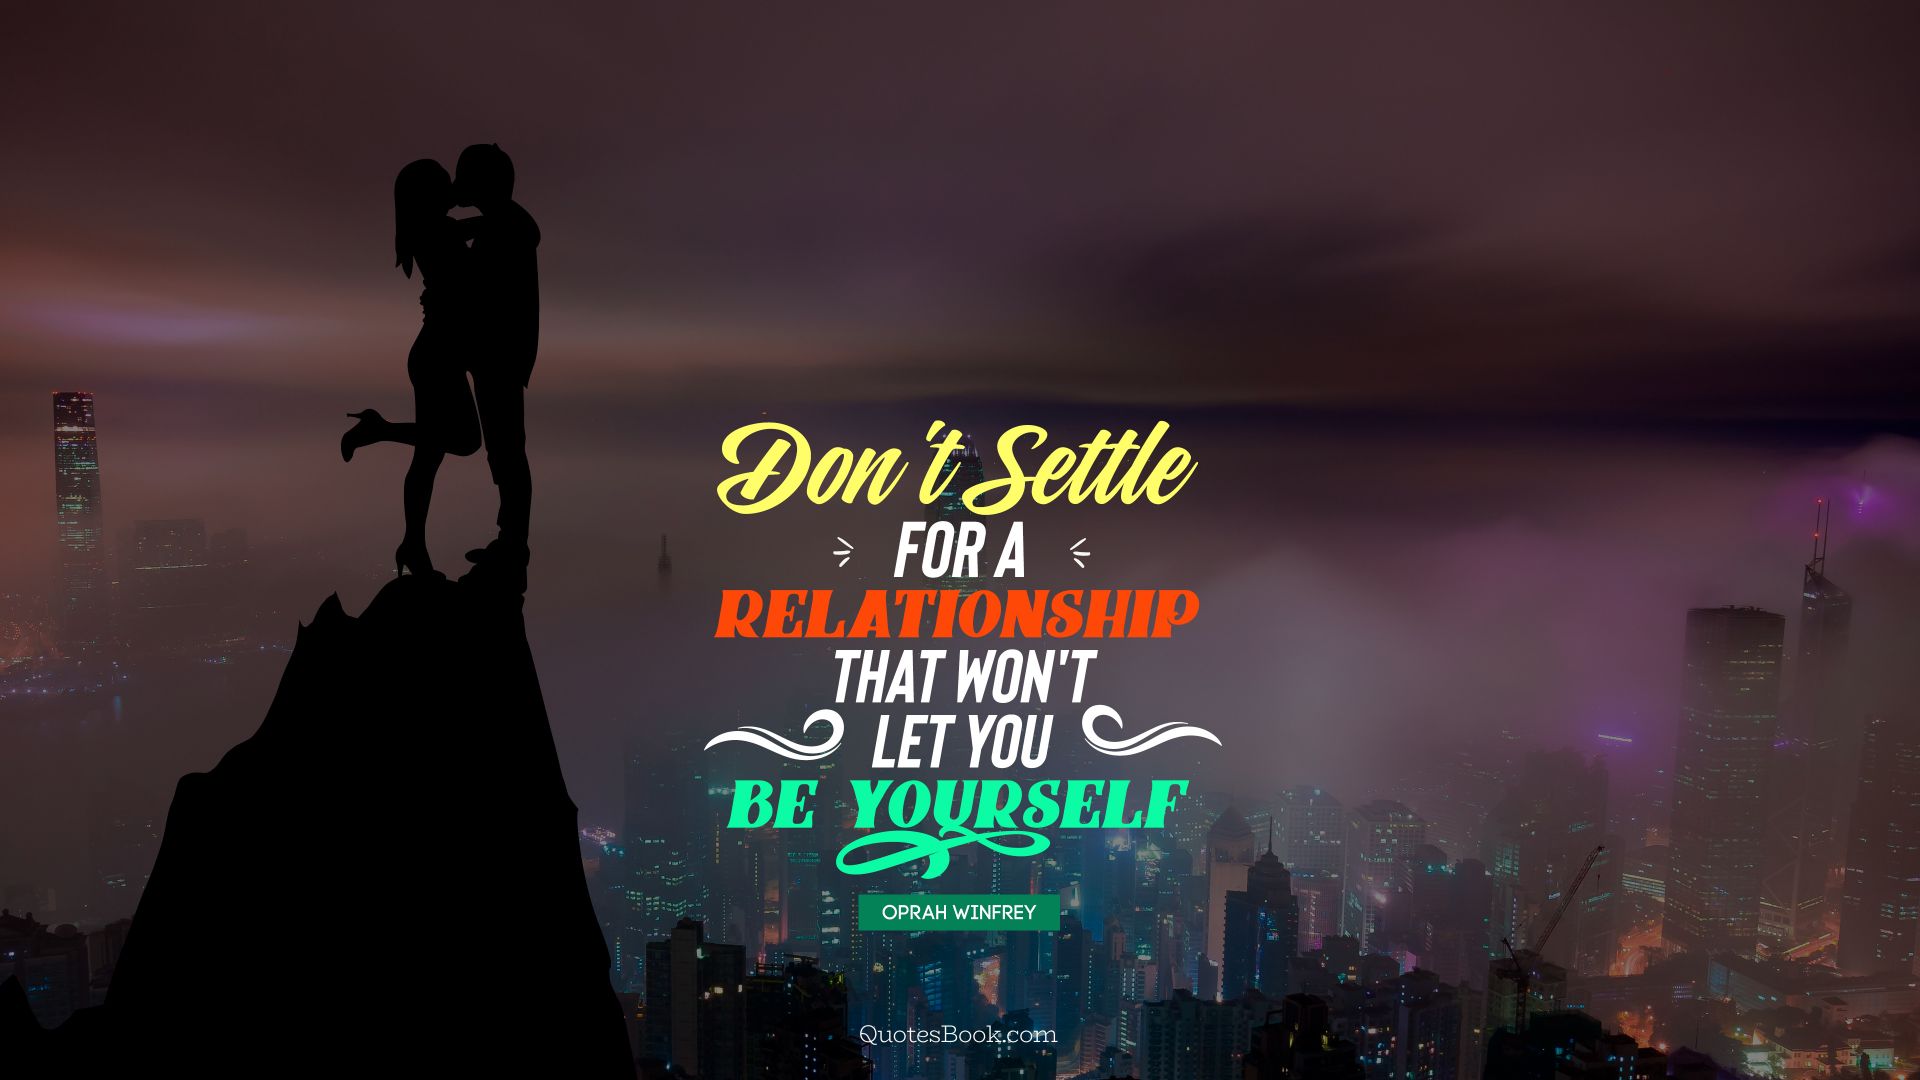 Don't settle for a relationship that won't let you be yourself. - Quote by Oprah Winfrey